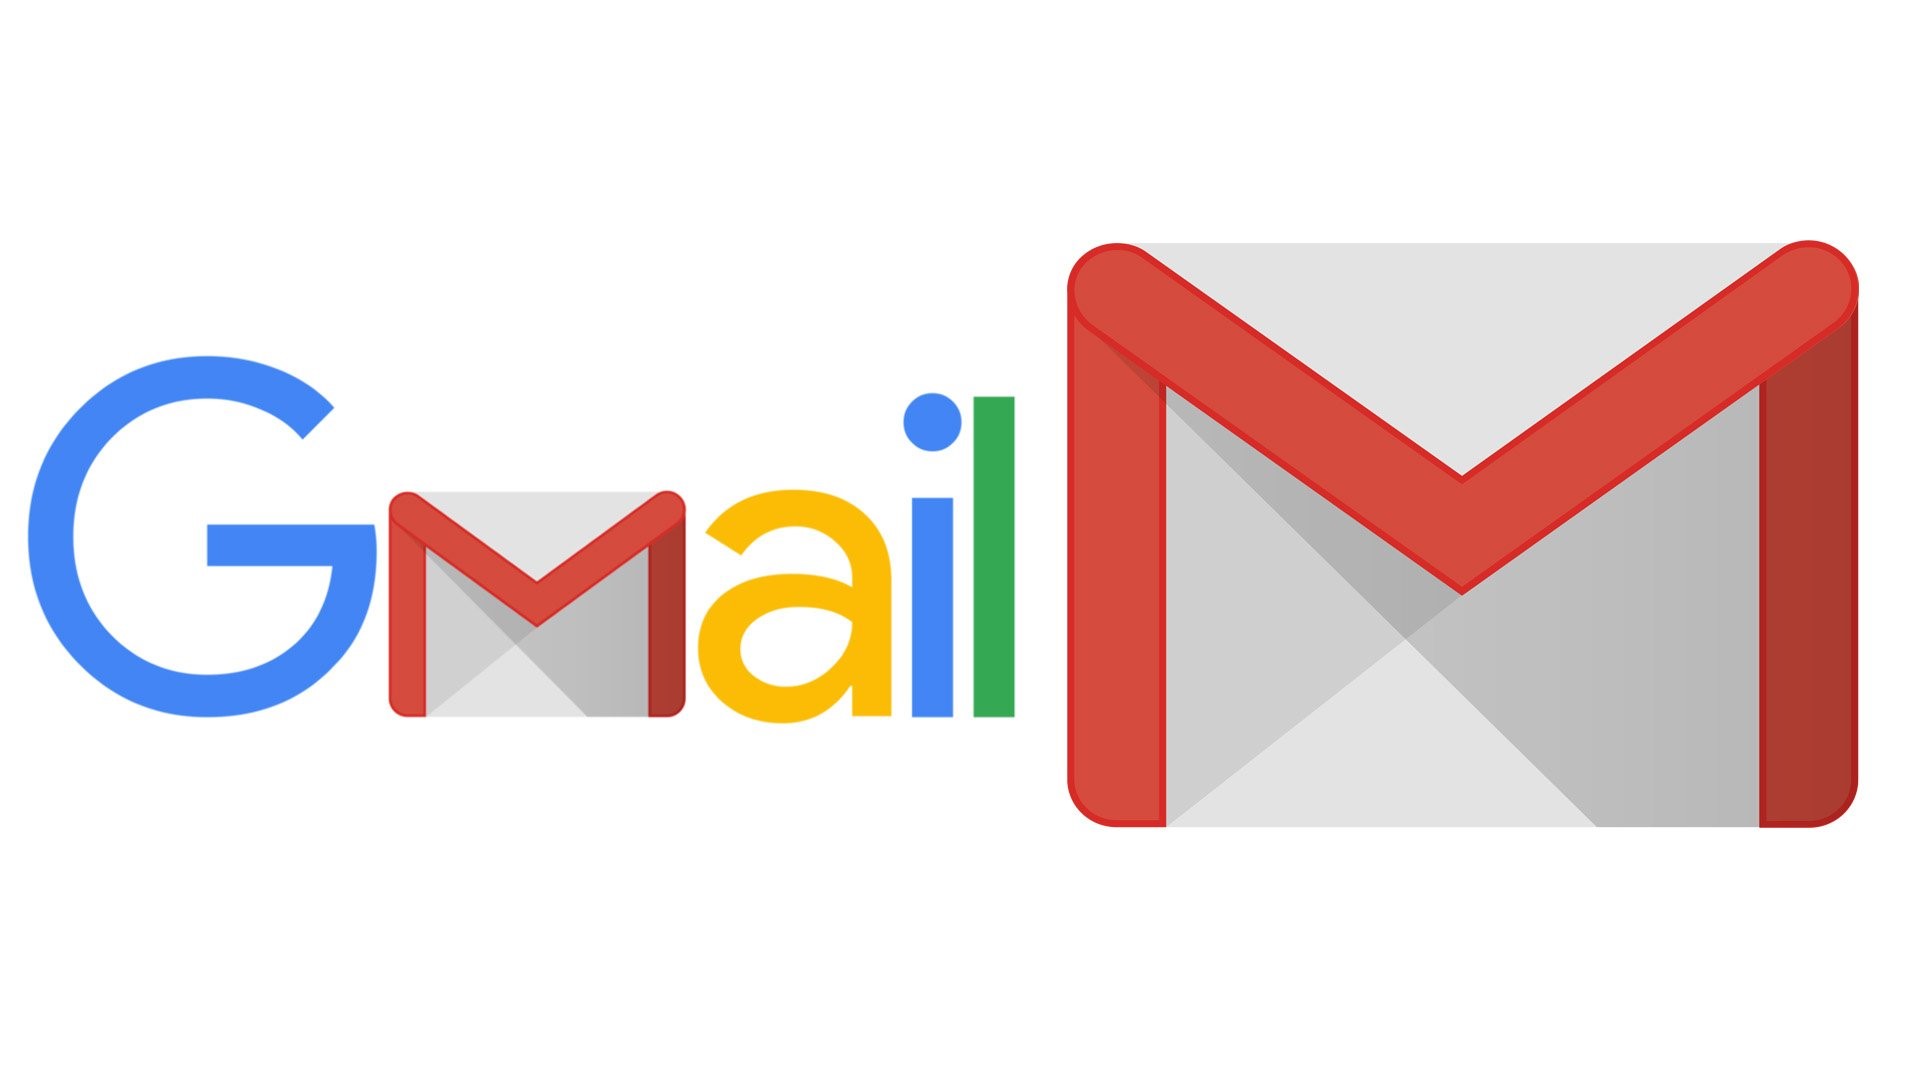 whats-so-great-about-gmail